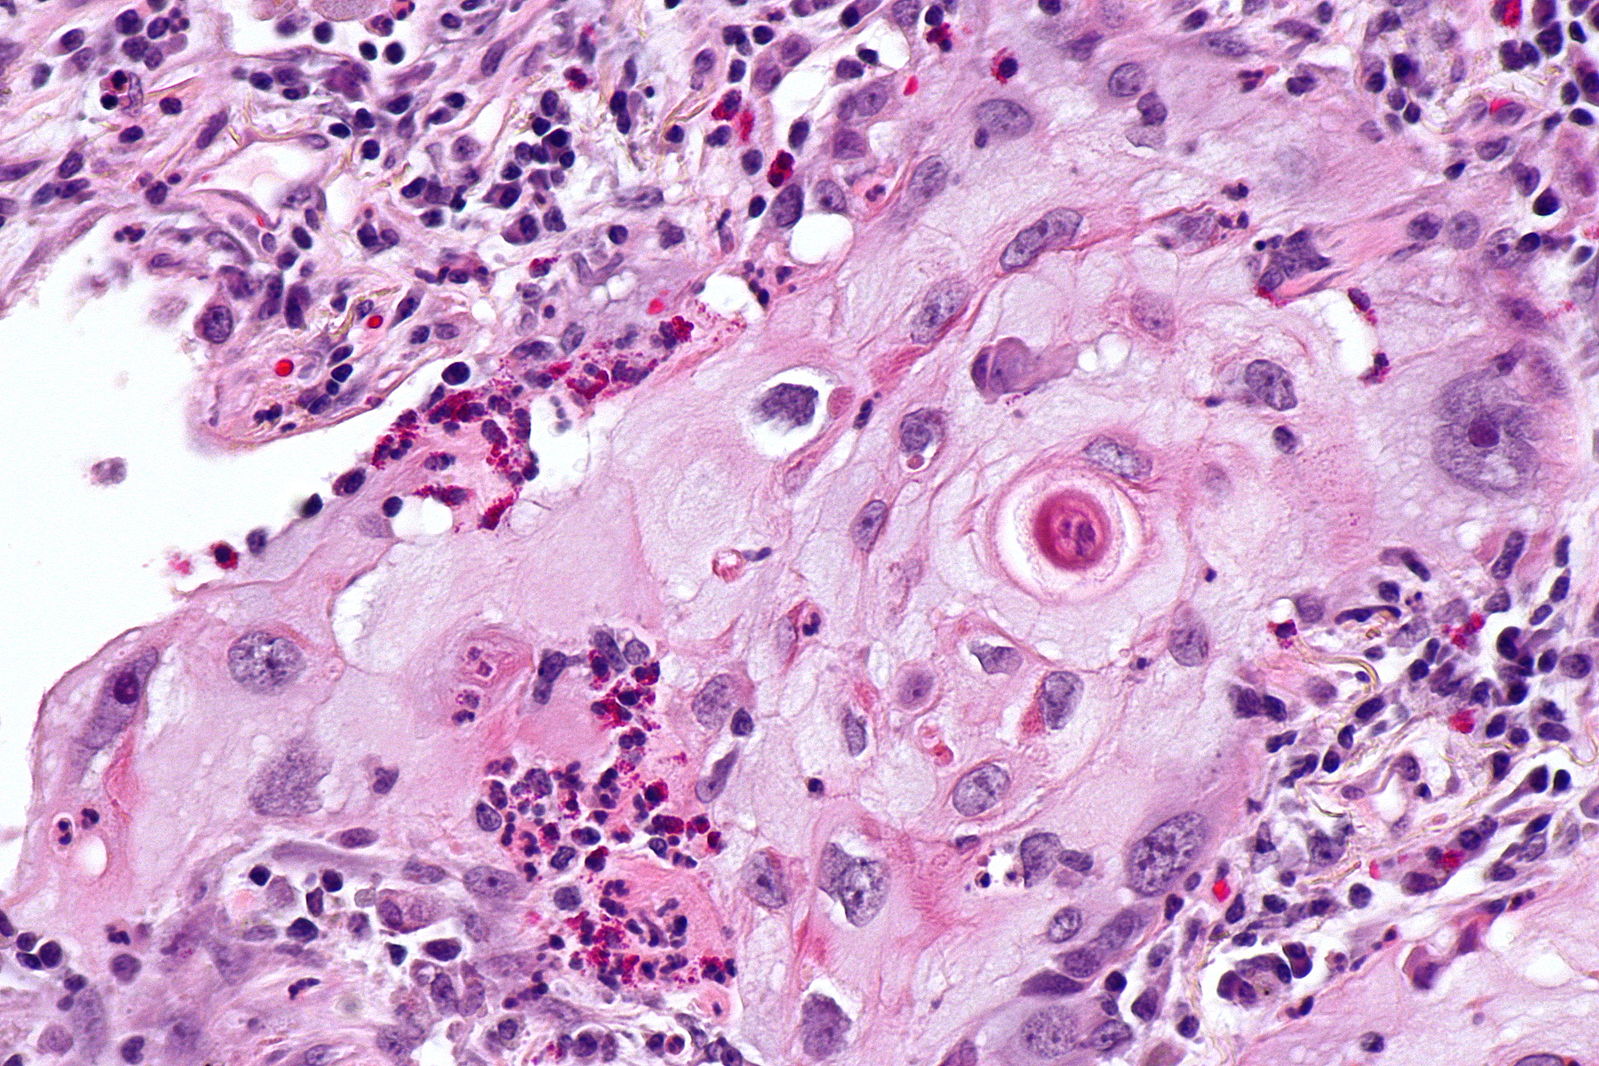 Micropathology: Squamous cell carcinoma of the lung. H&E stain via, Wikimedia Commons By Nephron (Own work) [8]